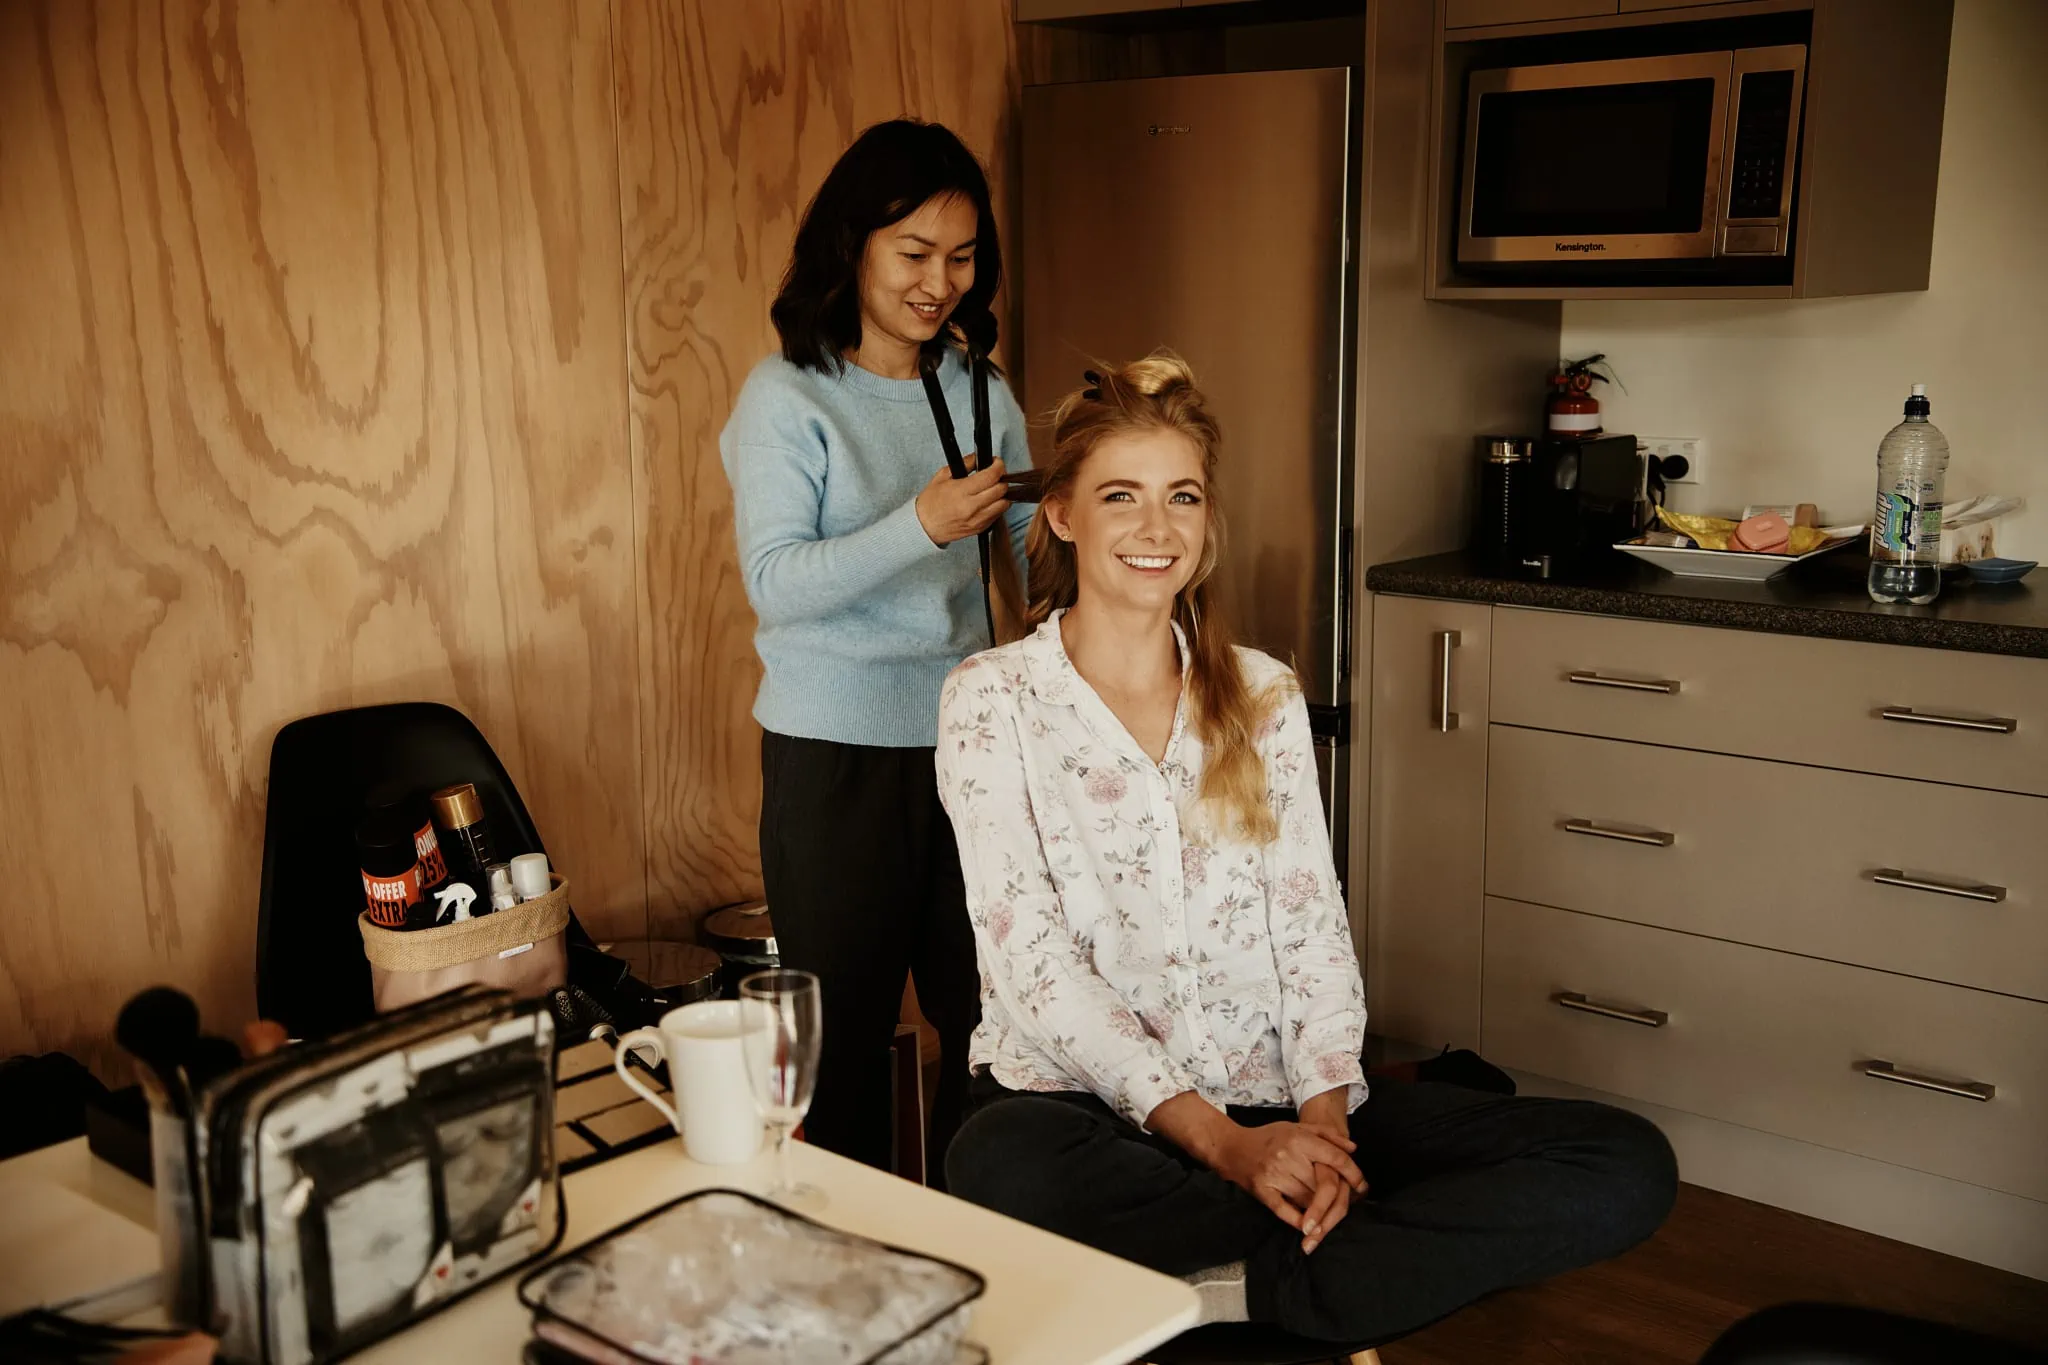 Claire is getting her hair done in a kitchen for her Heli Elopement Wedding at Cecil Peak.